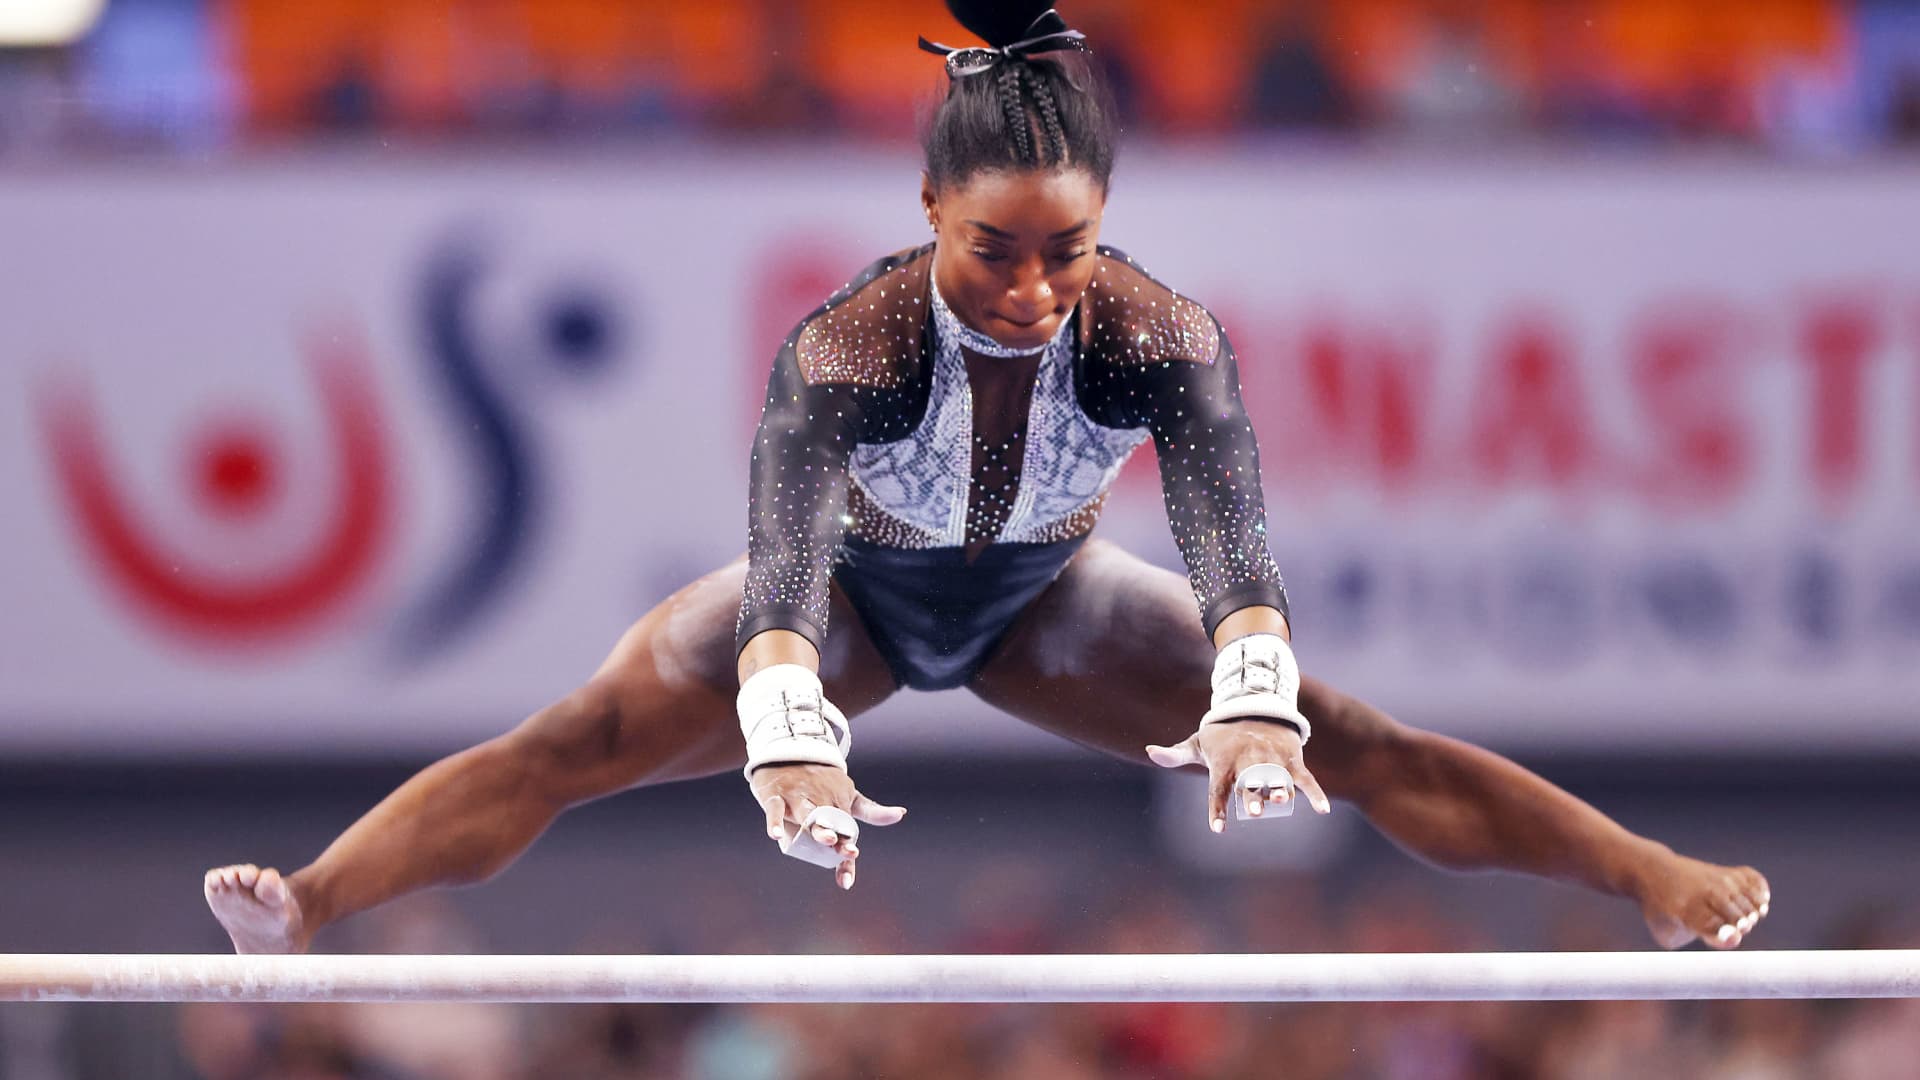 Simone Biles competes on the uneven bars prior to the Senior Women's competition of the U.S. Gymnastics Championships at Dickies Arena on June 06, 2021 in Fort Worth, Texas.